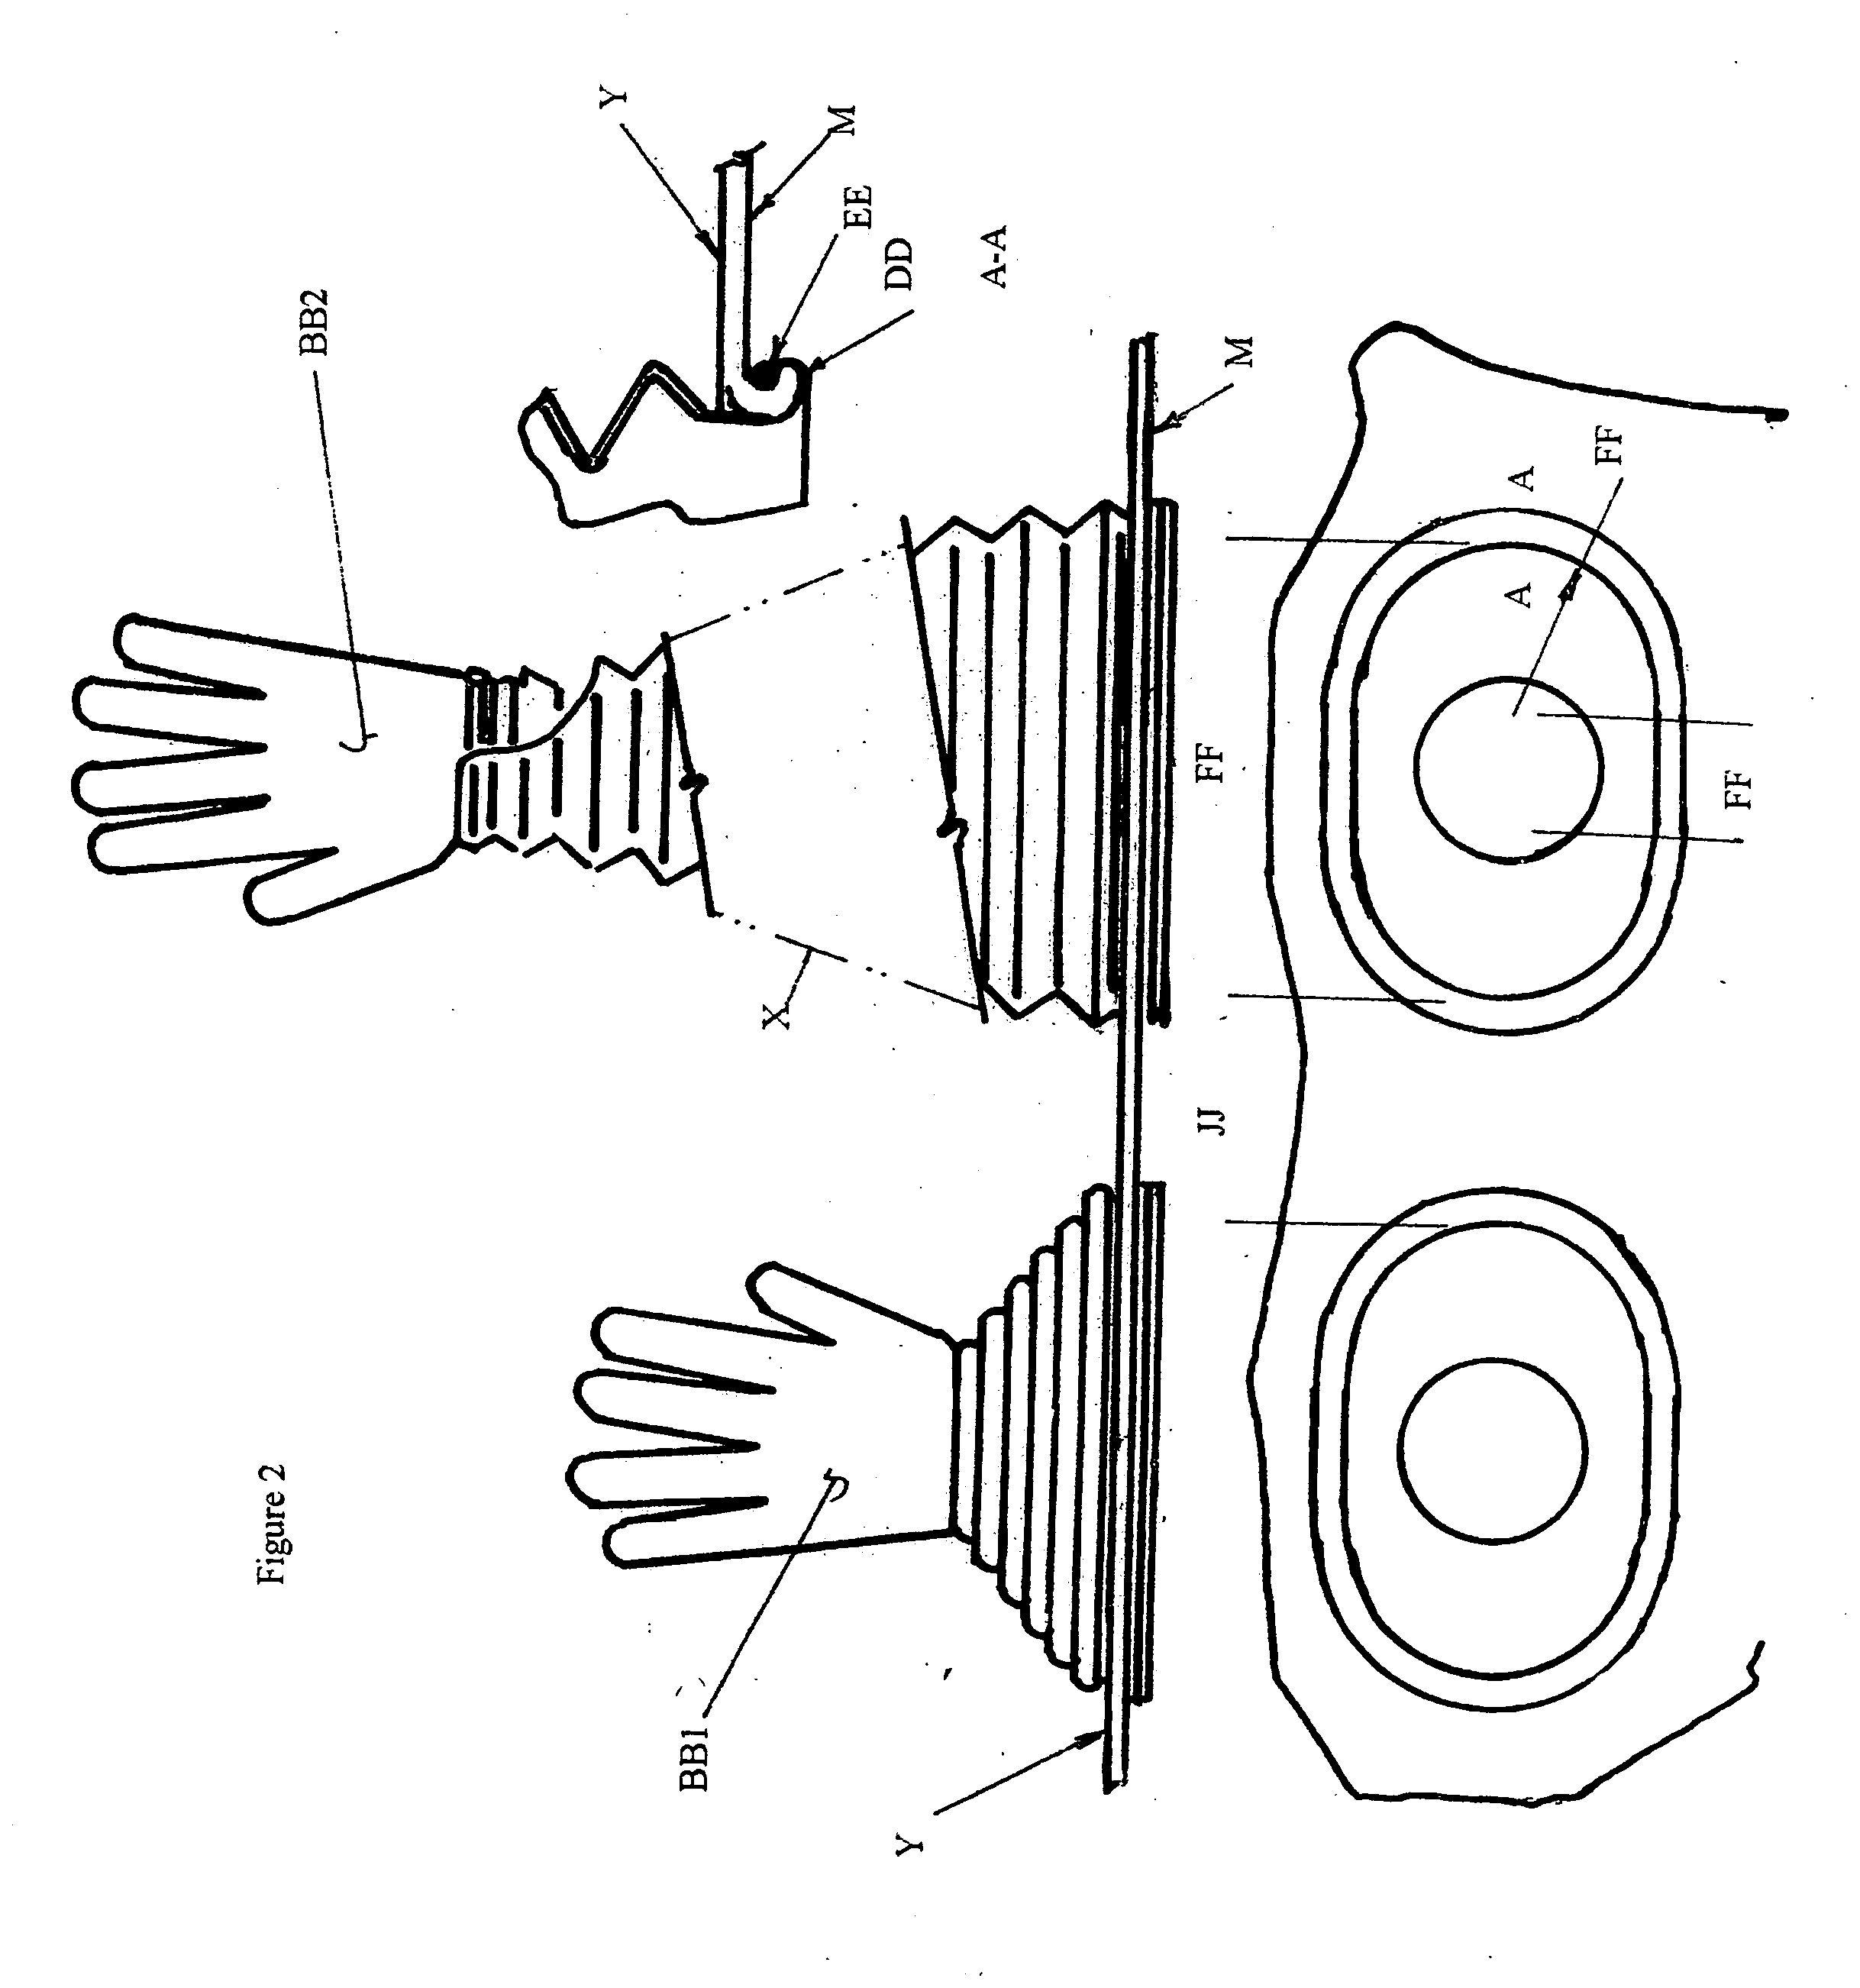 Method & Device for Containing Deadly Germs of a Patient During Treatment